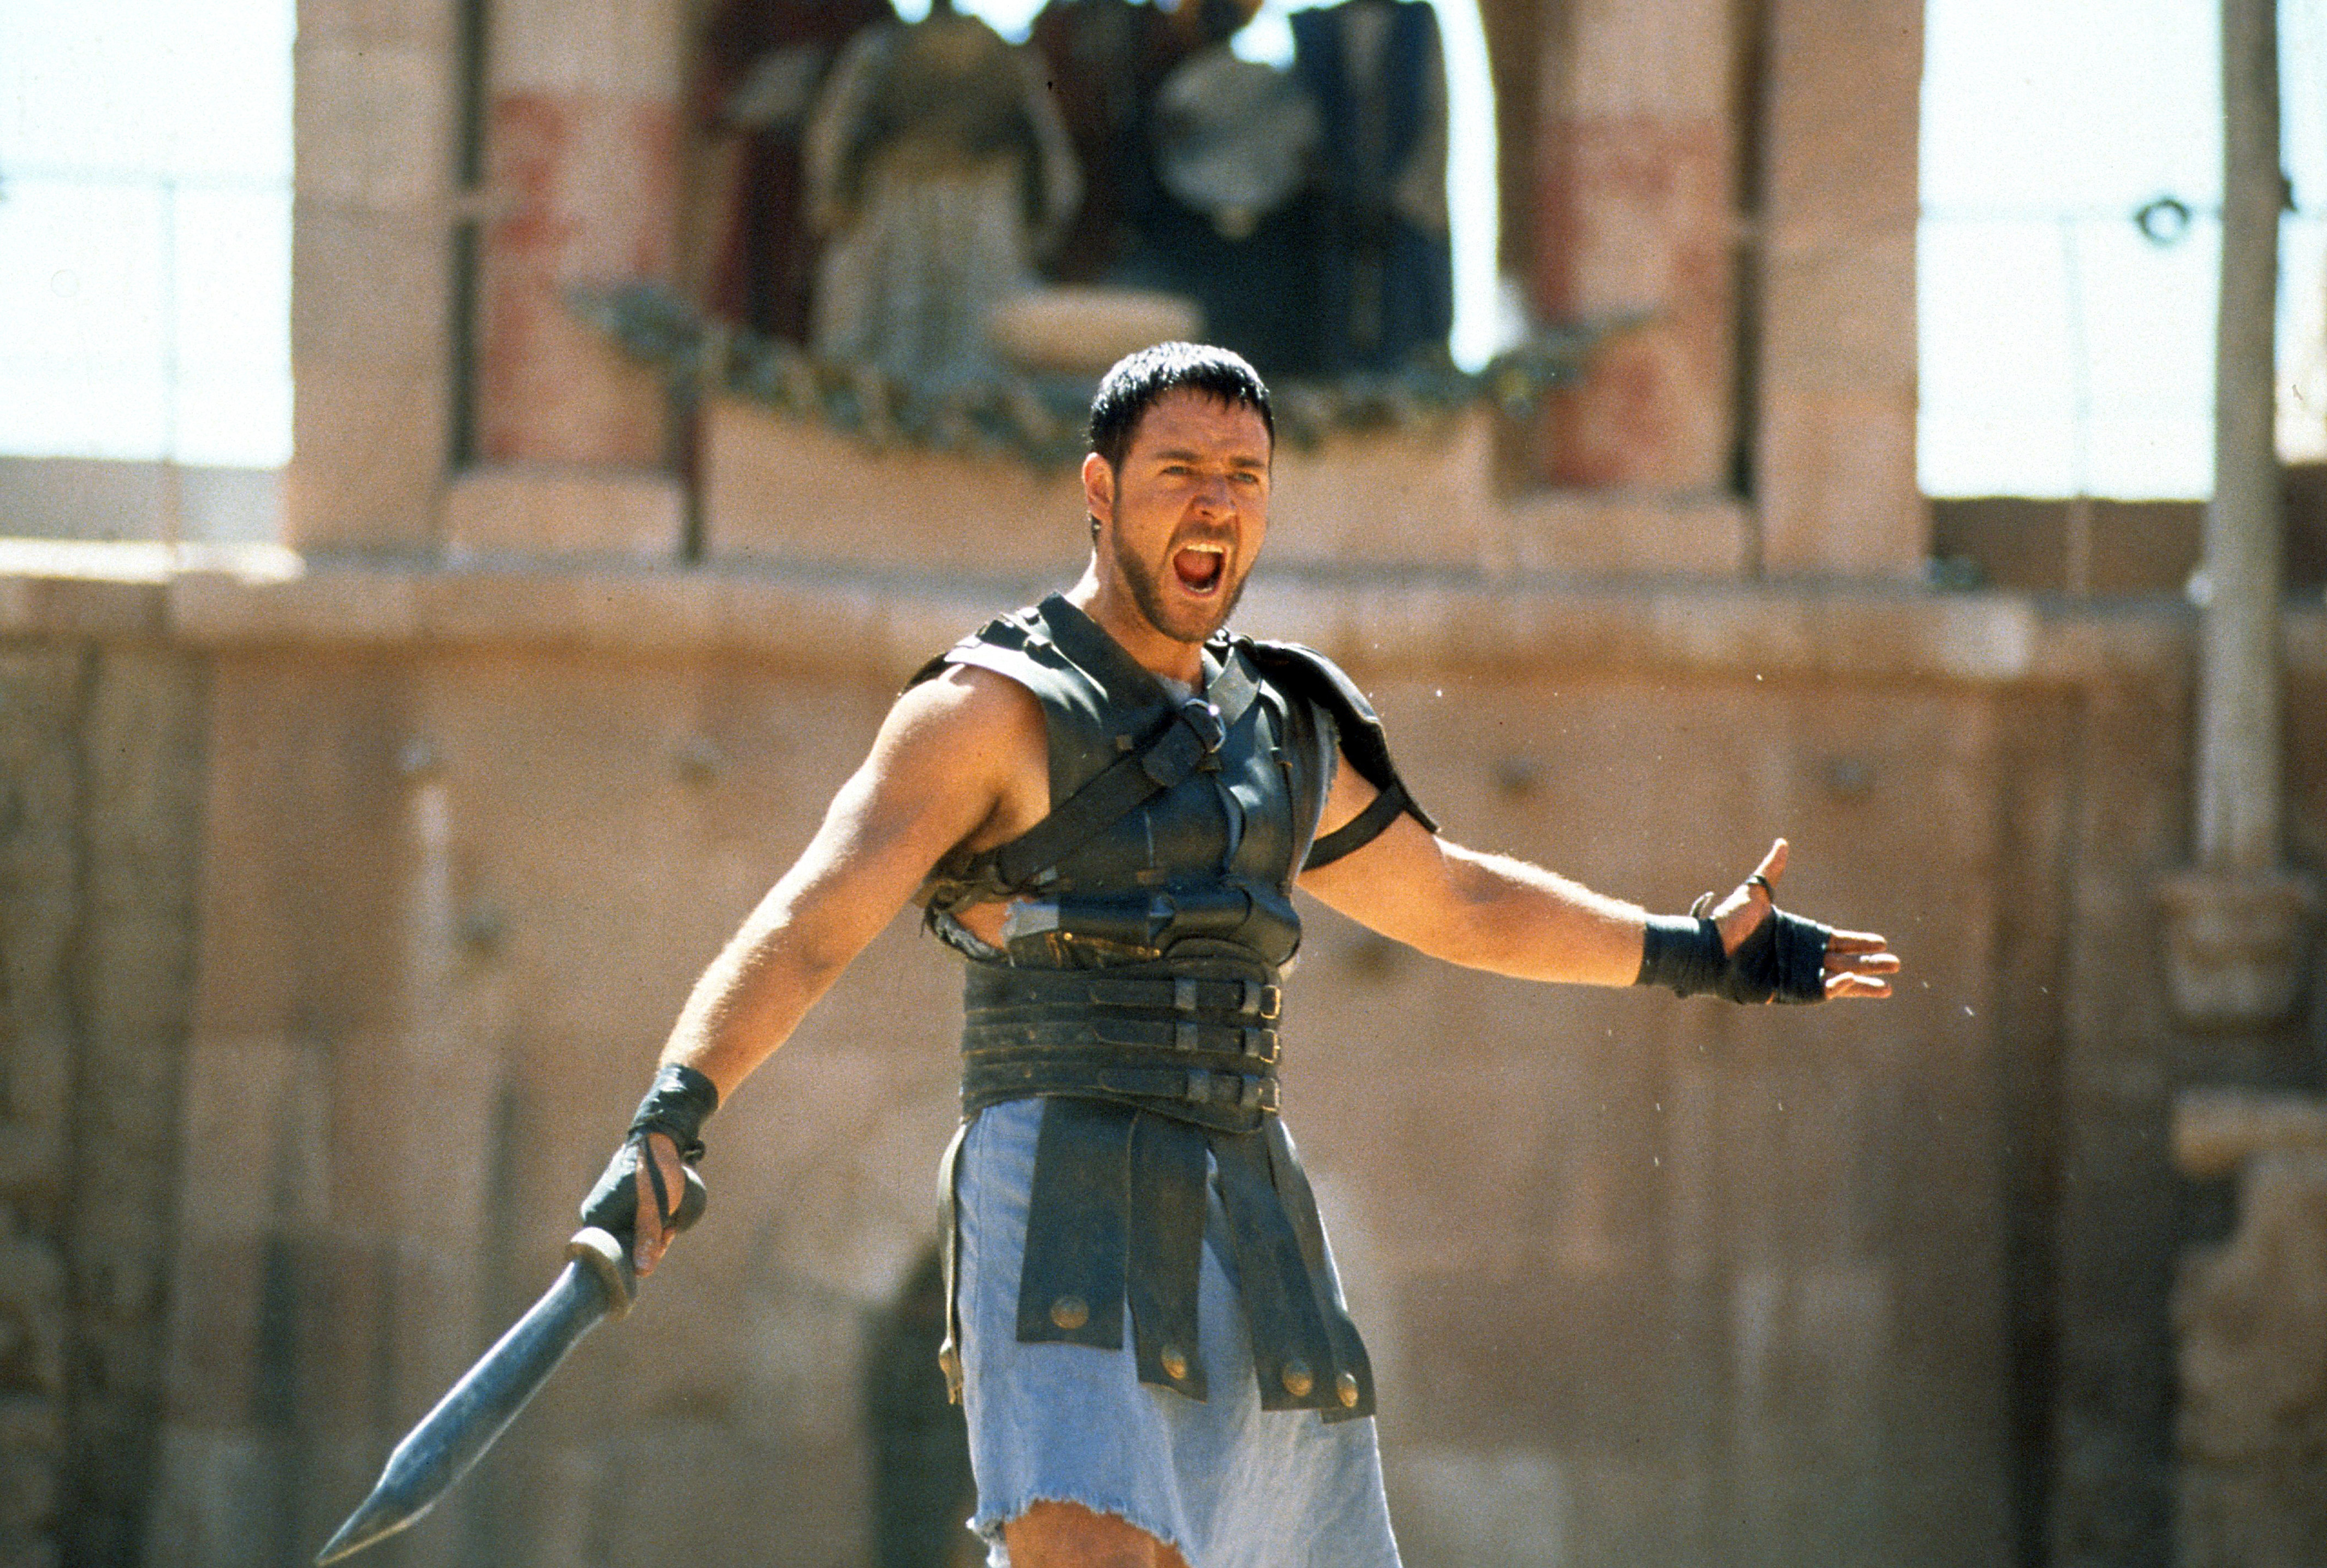 Russell Crowe in "Gladiator", 2000 | Quelle: Getty Images